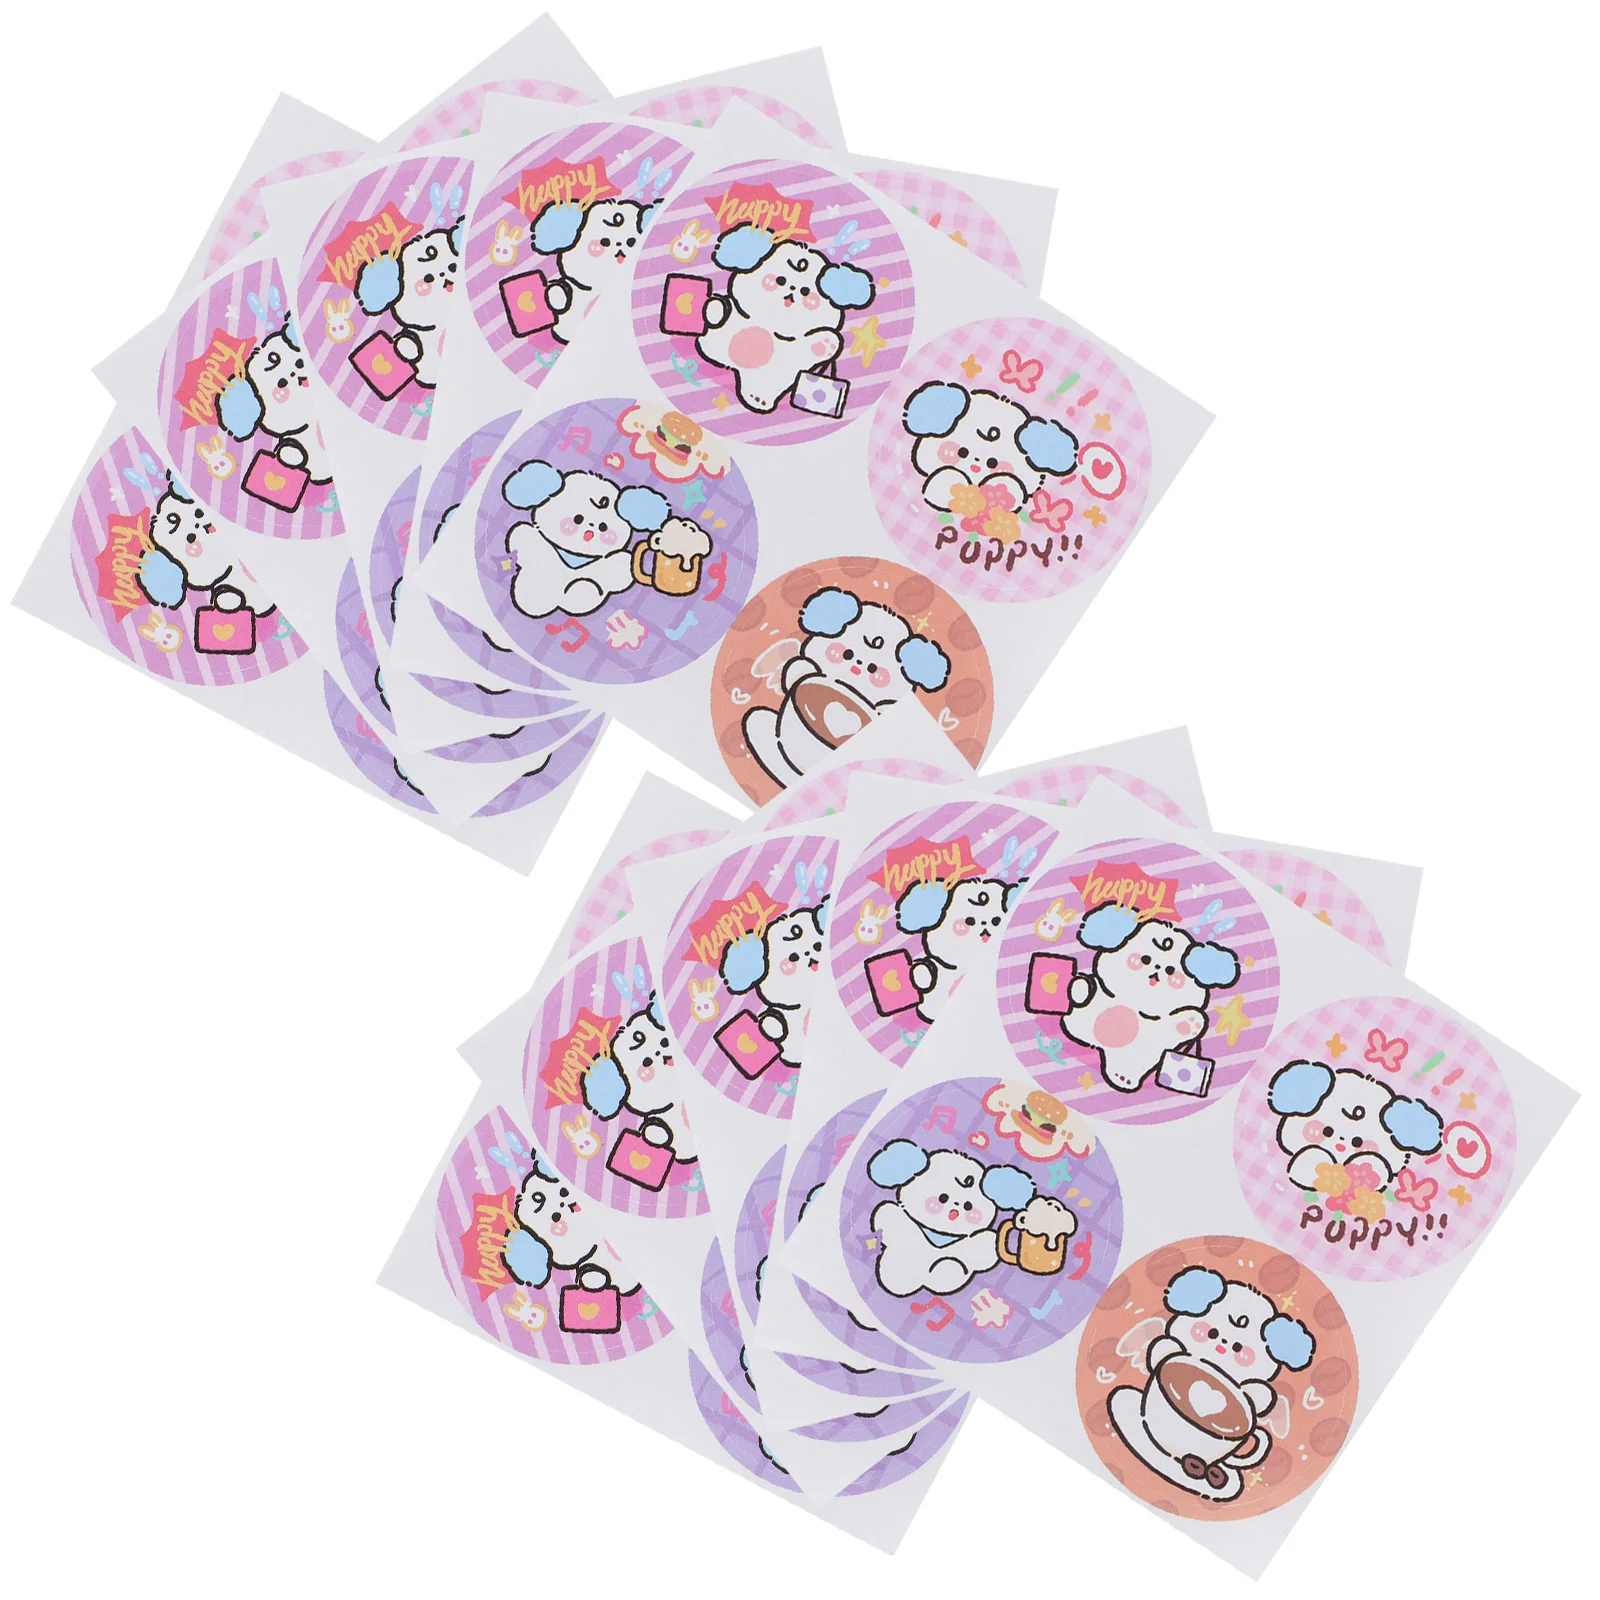 100 Sheets Puppy Stickers Gift Labels Envelopes Sealing Classification Dot Mark Marking Cartoon Self-adhesive Paper Round